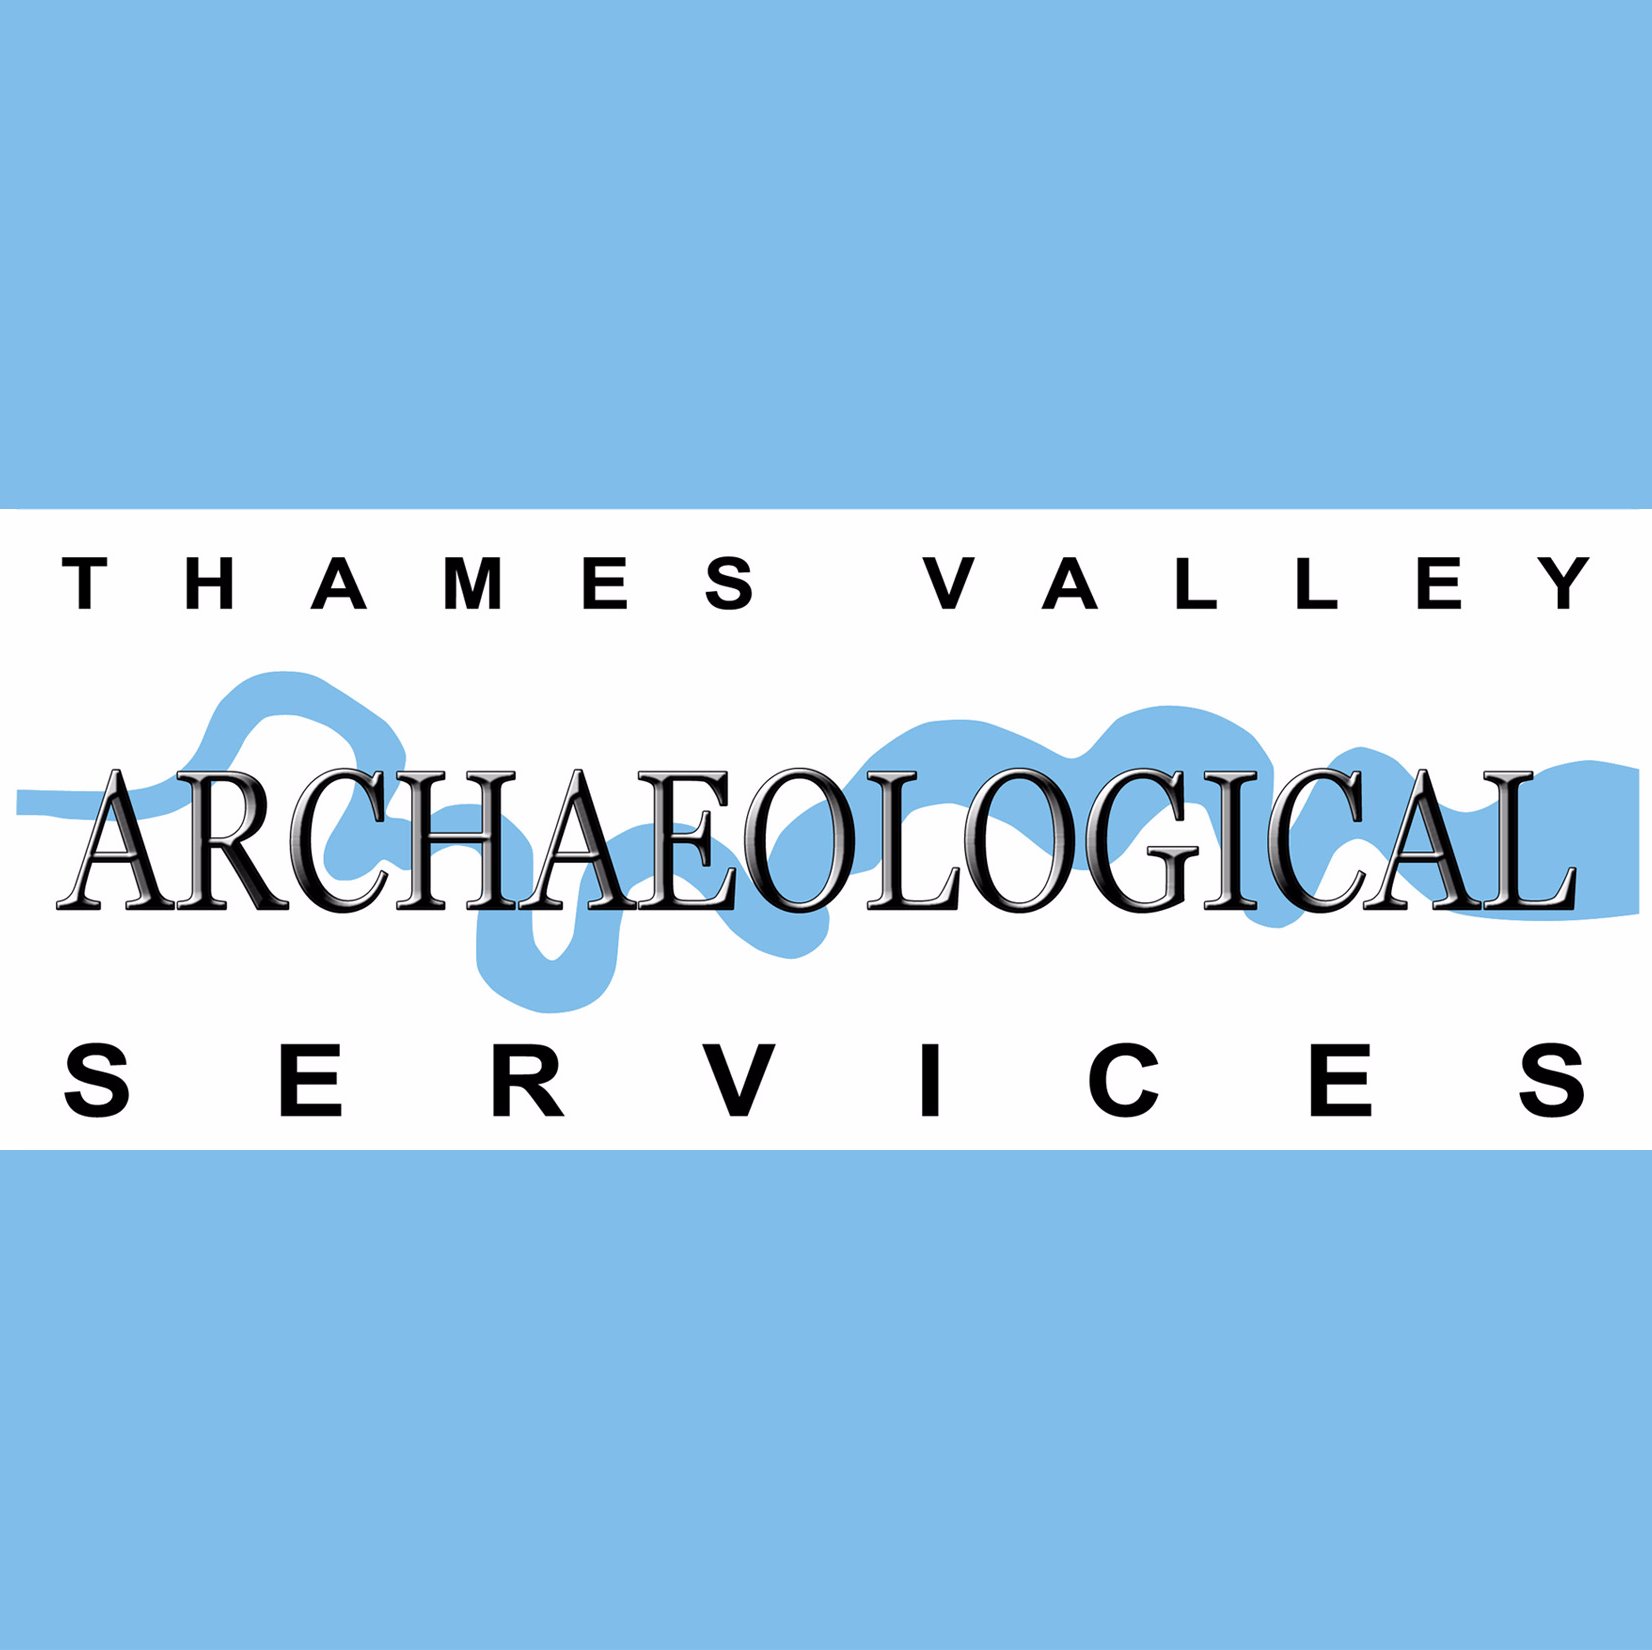 Thames Valley Arch